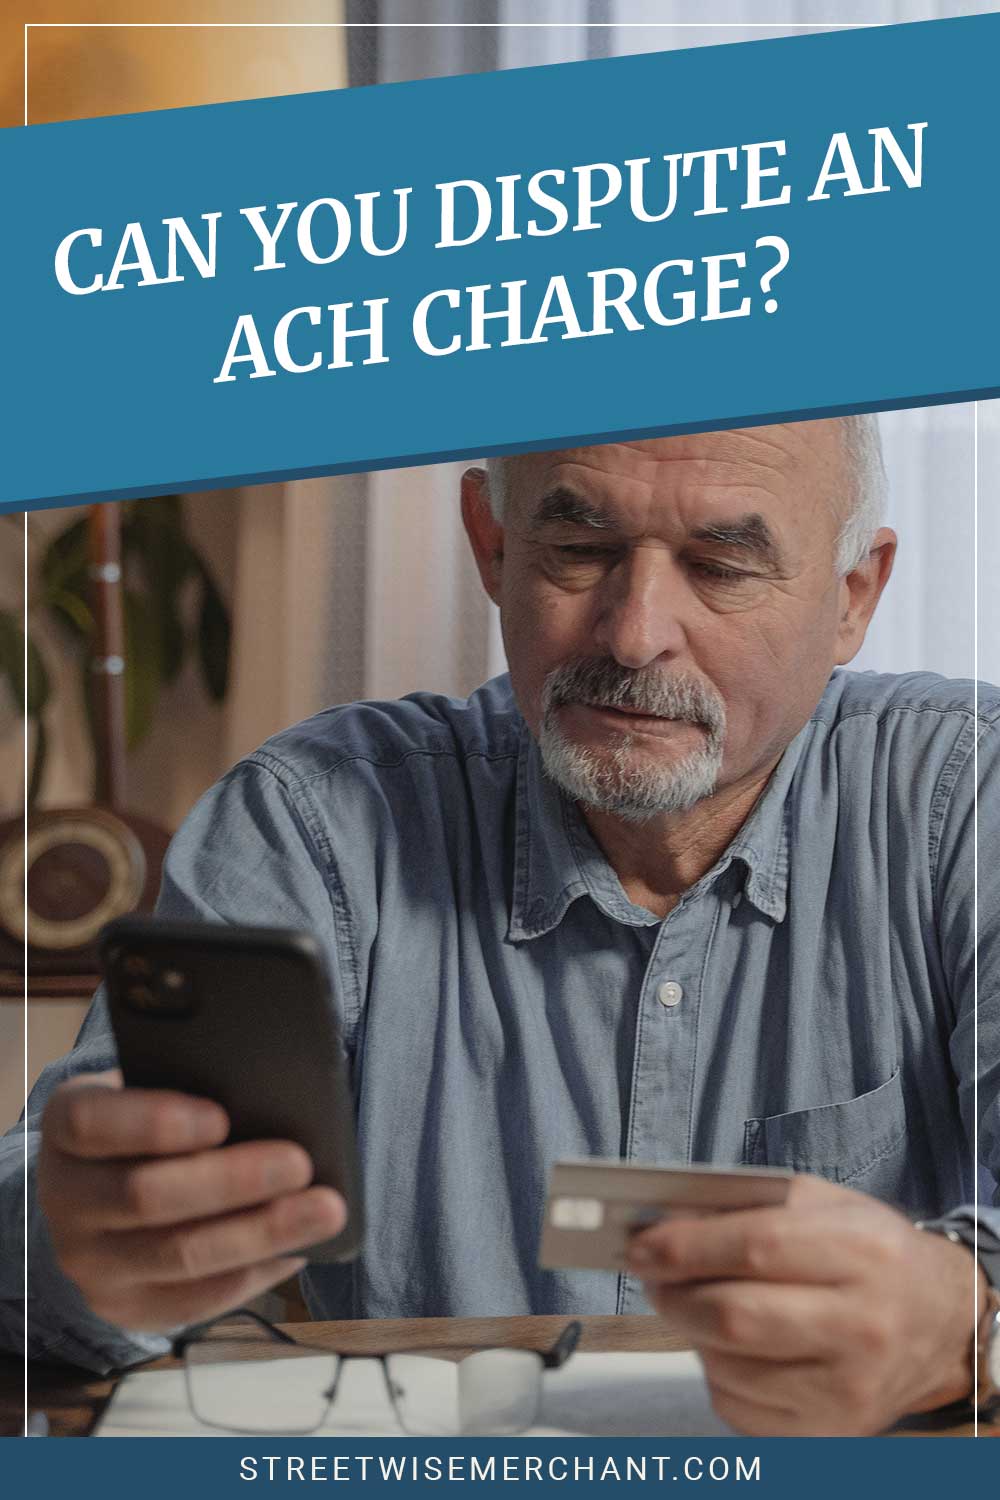 Old man looking at his phone with a debit card in hand - Can You Dispute an ACH Charge?